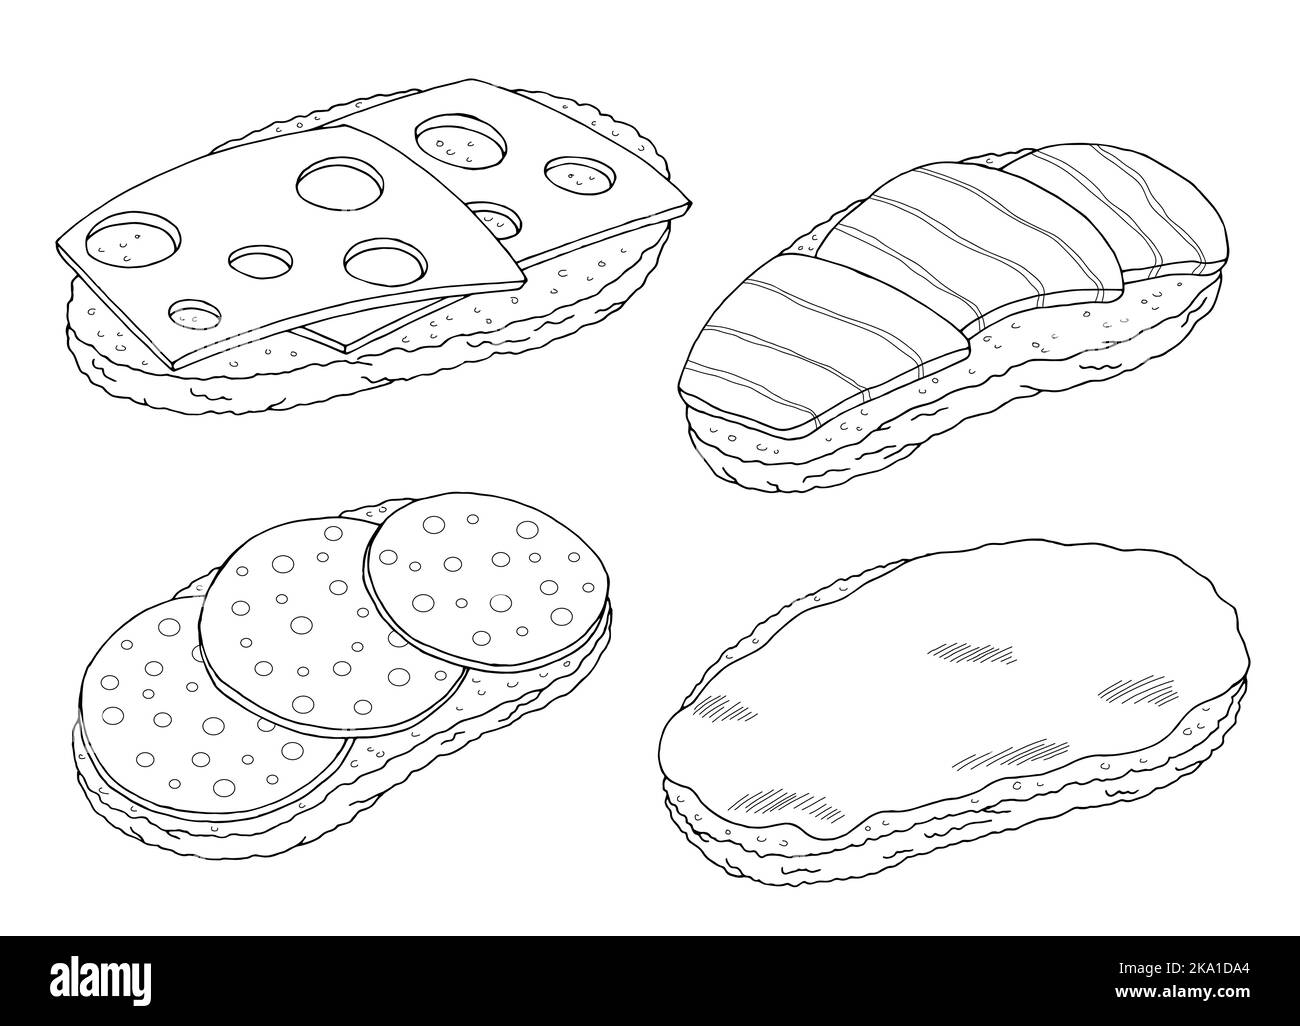 Sandwich set graphic fast food black white sketch isolated illustration vector Stock Vector